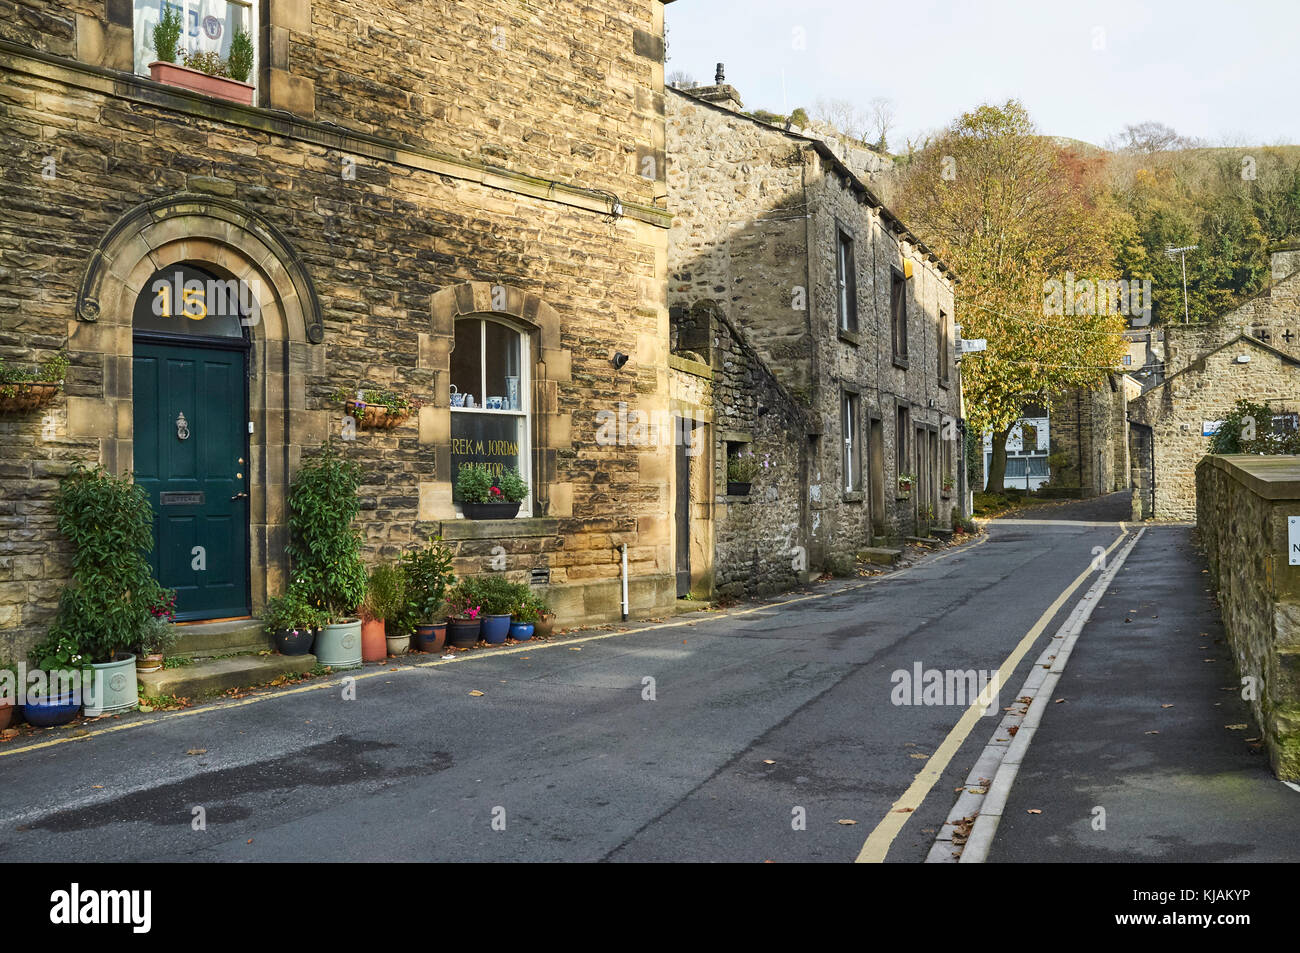 The market town of Settle, Yorkshire Dales, Northern England, UK Stock Photo